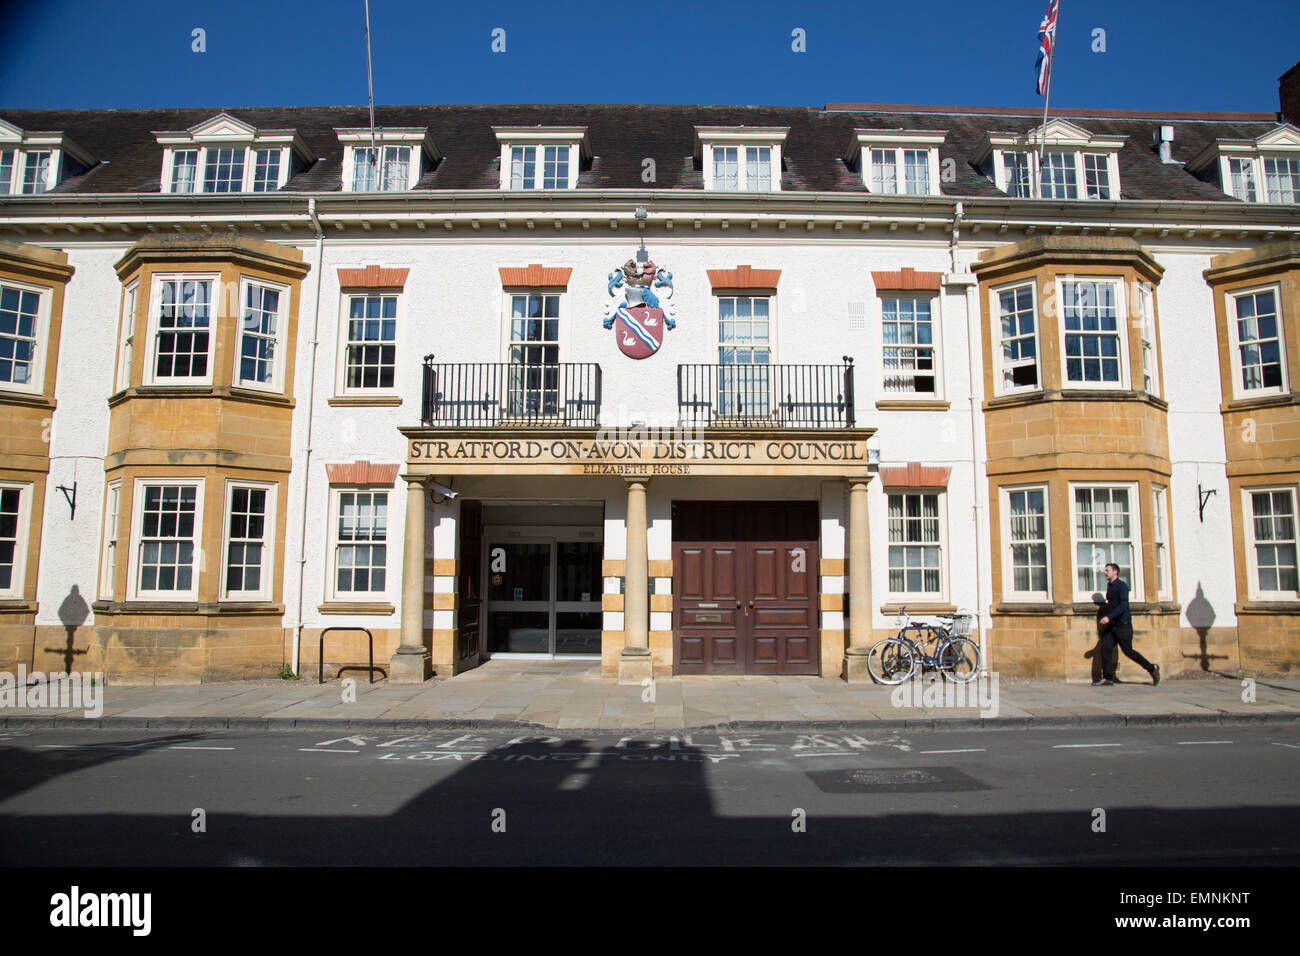 Exterior of Stratford on Avon District Council headquarters building Stock Photo